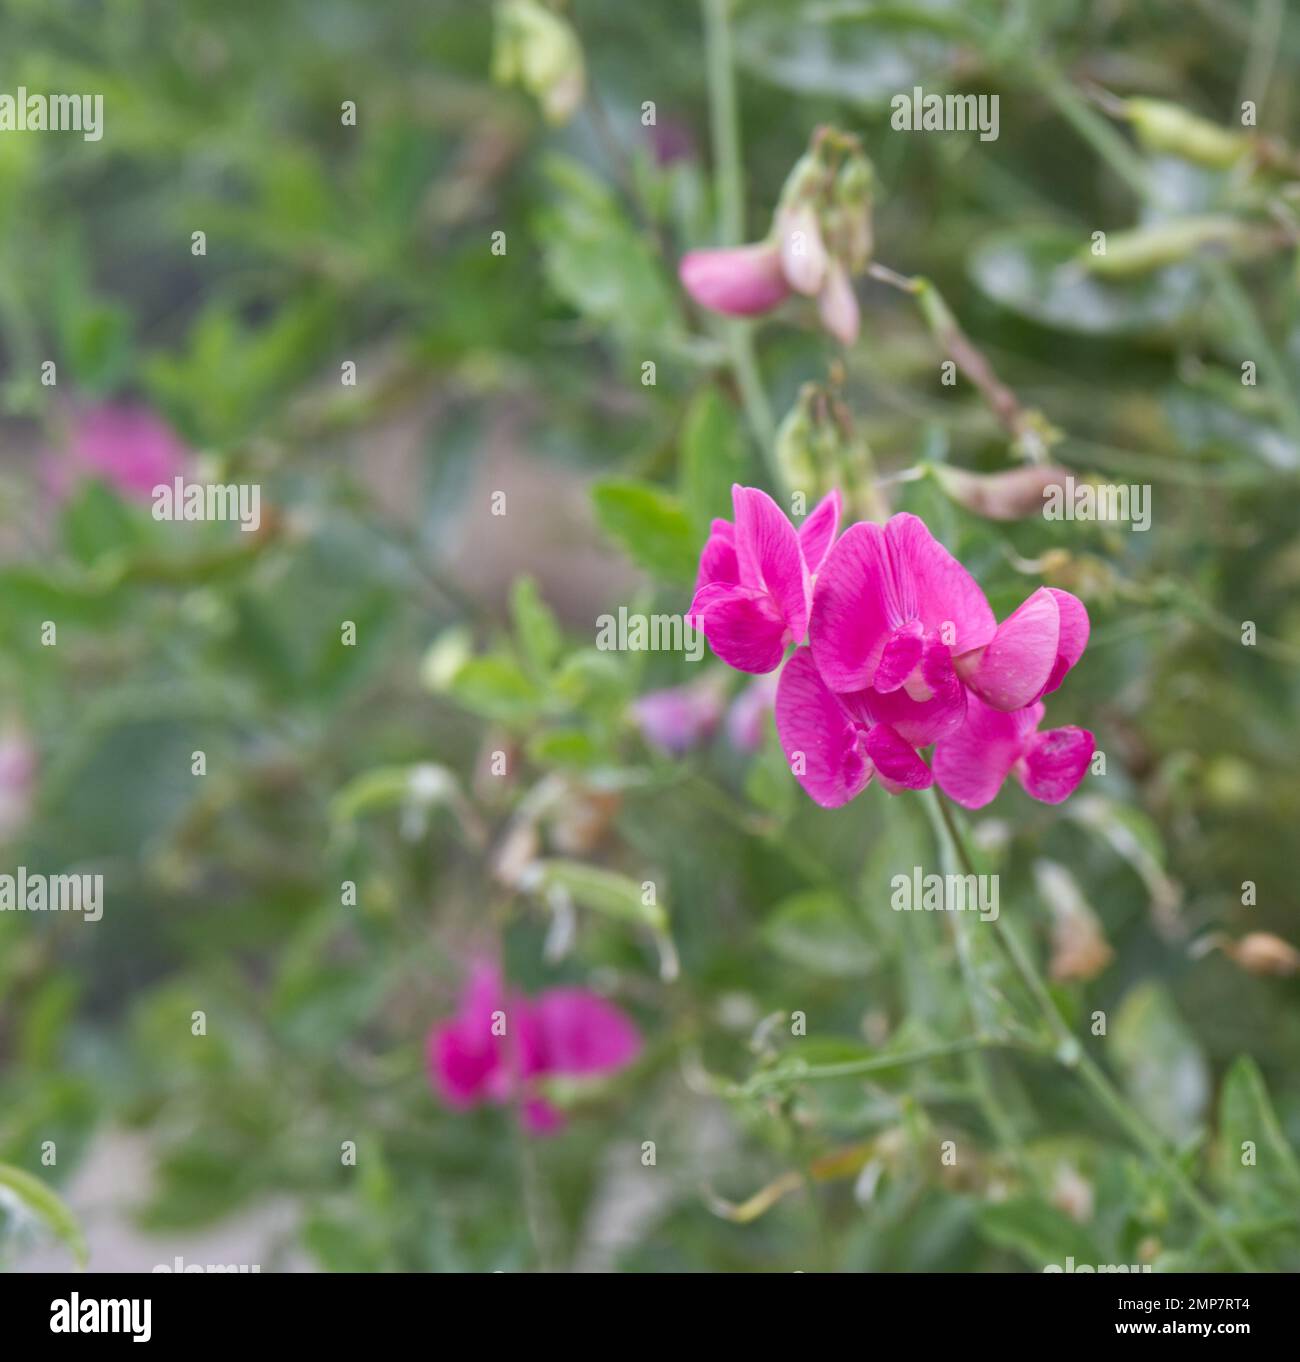 Bright pink flowers of food crop Earthnut Pea, also known as Lathyrus tuberosus or Tuberous pea plant in UK garden September Stock Photo